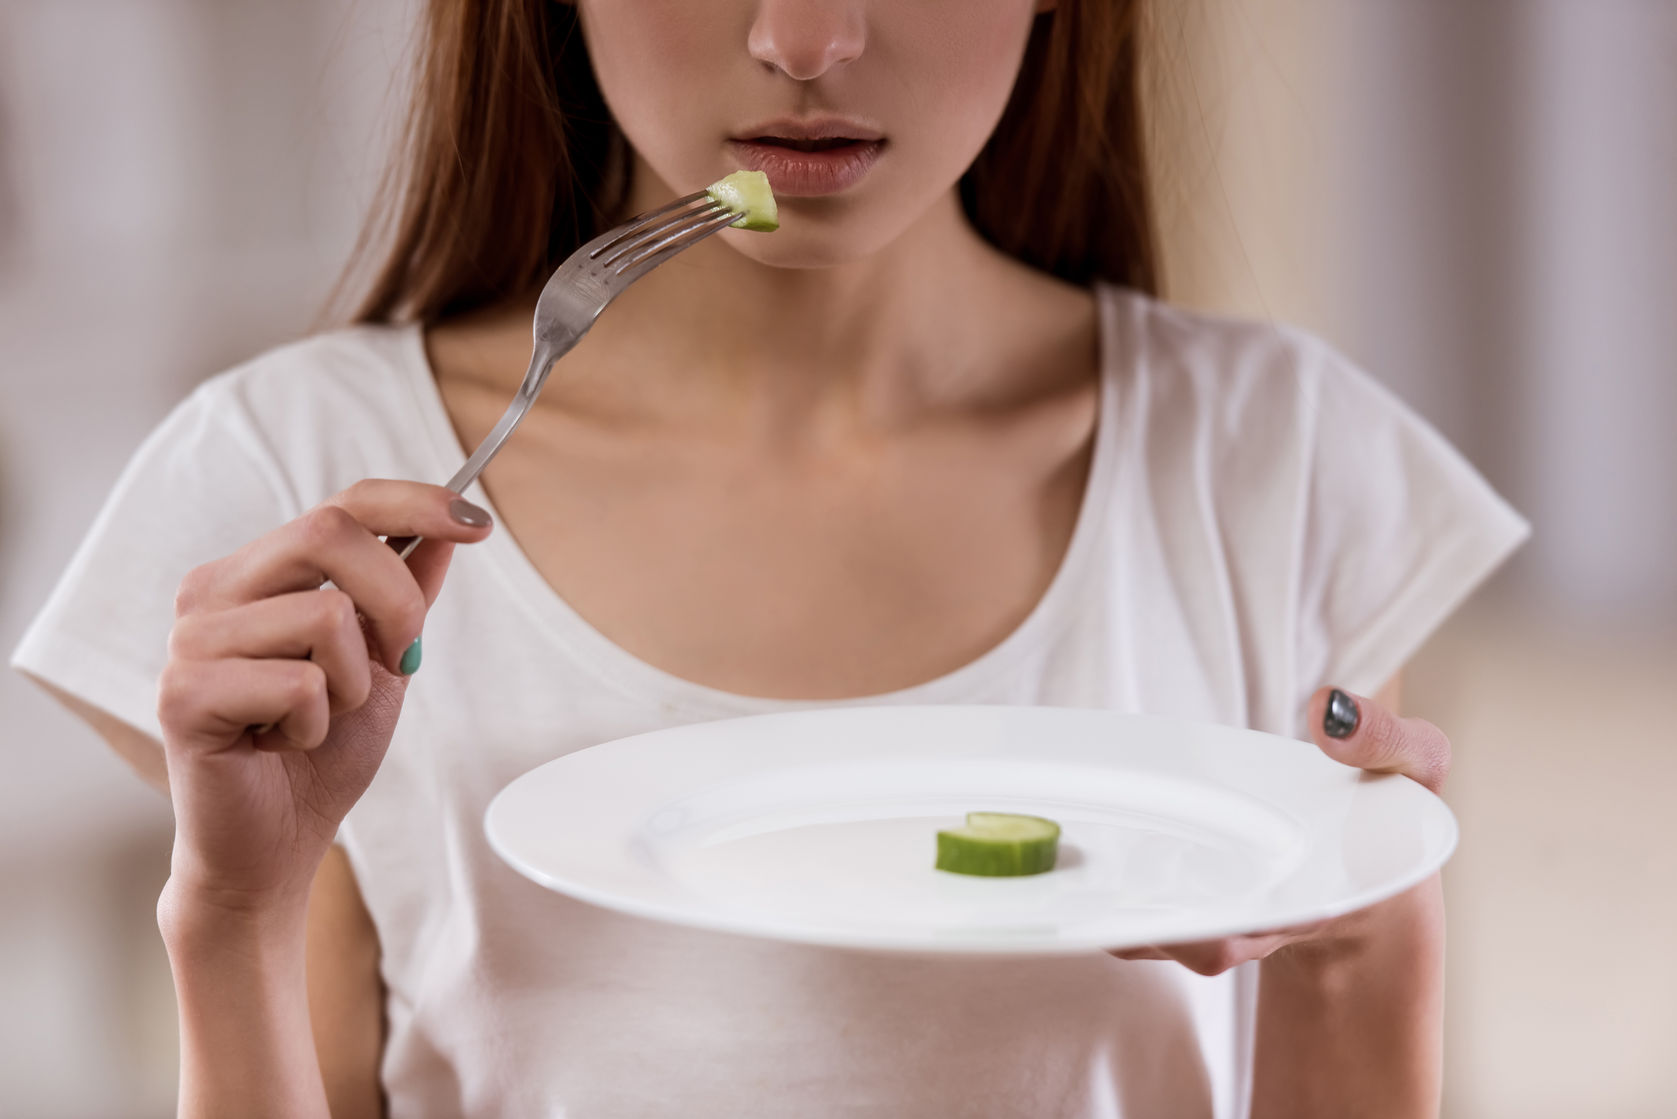 What Are The Warning Signs of Disordered Eating?